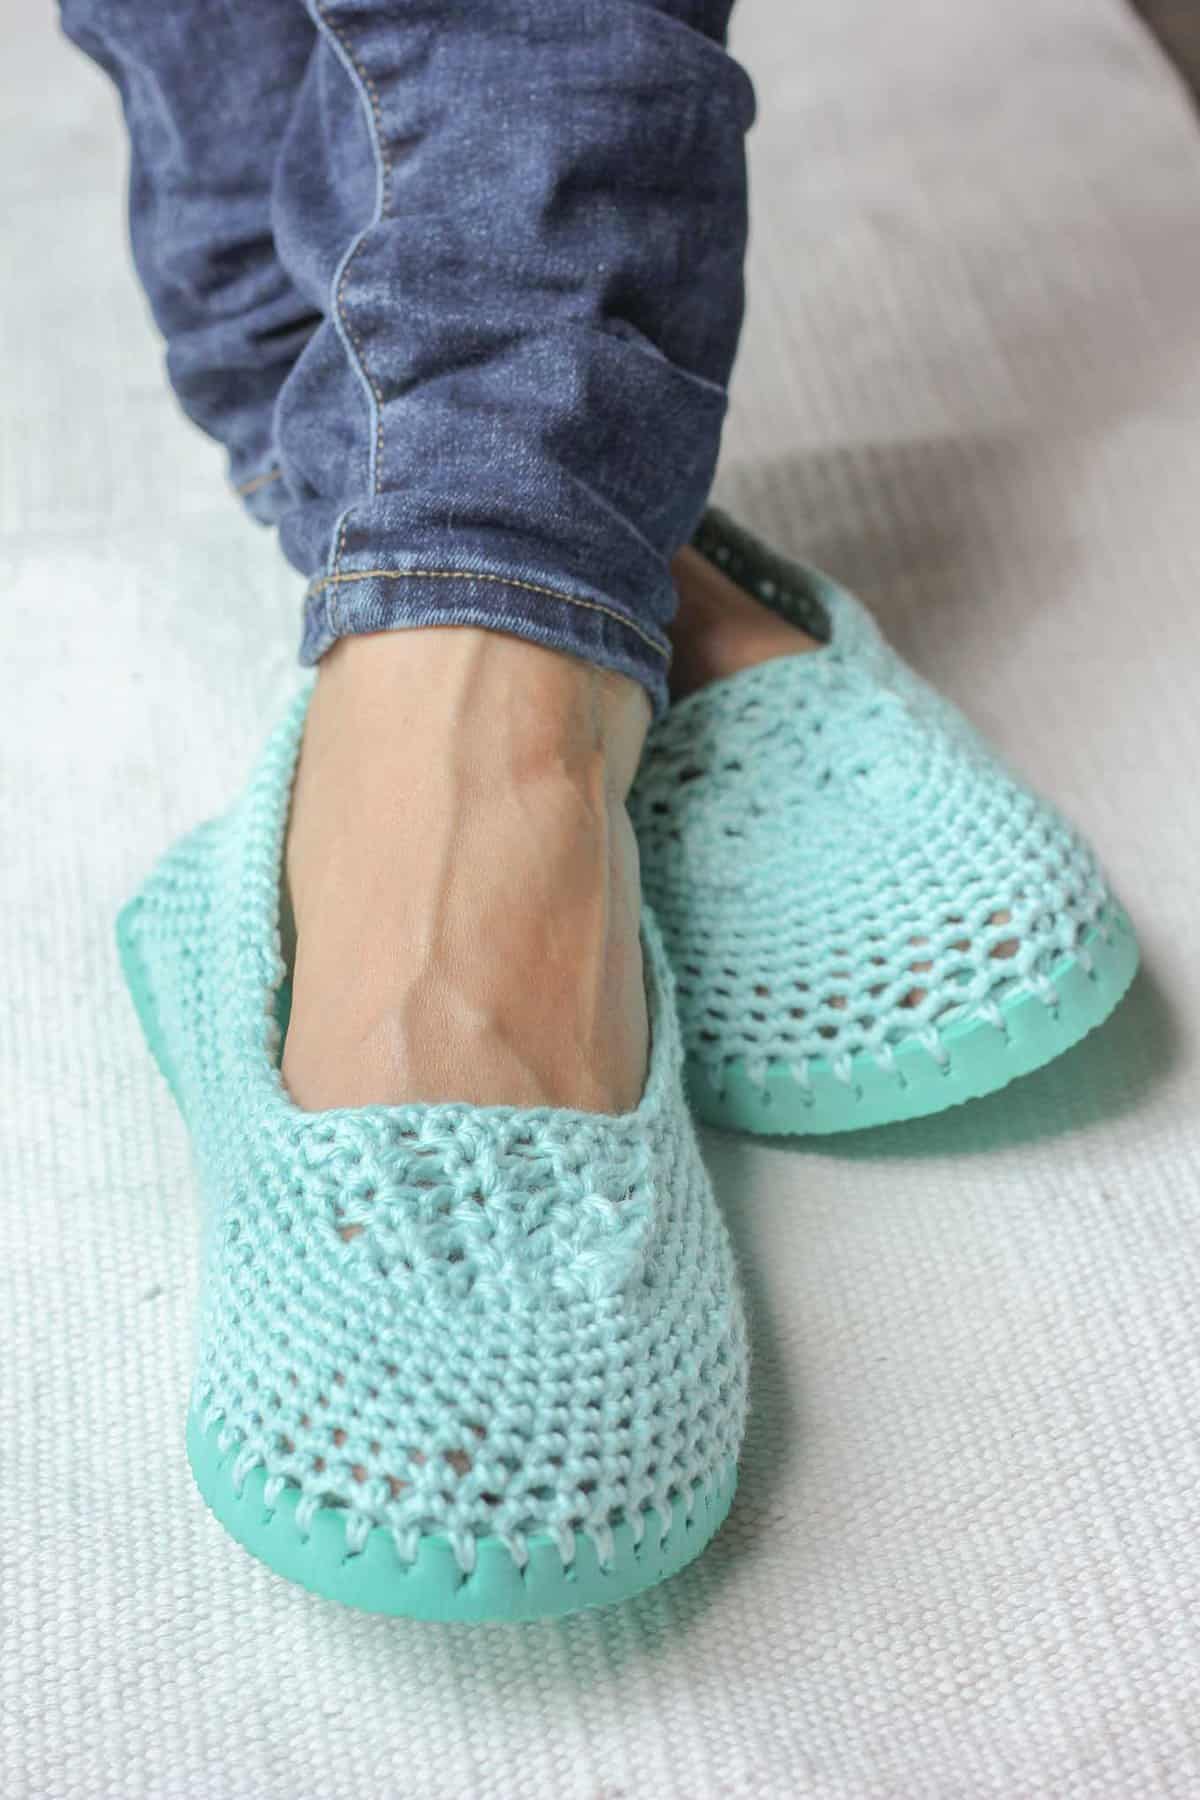 Cotton yarn and a flip flop sole make this free crochet slippers pattern perfect for warmer weather. Click to get the full pattern. | MakeAndDoCrew.com